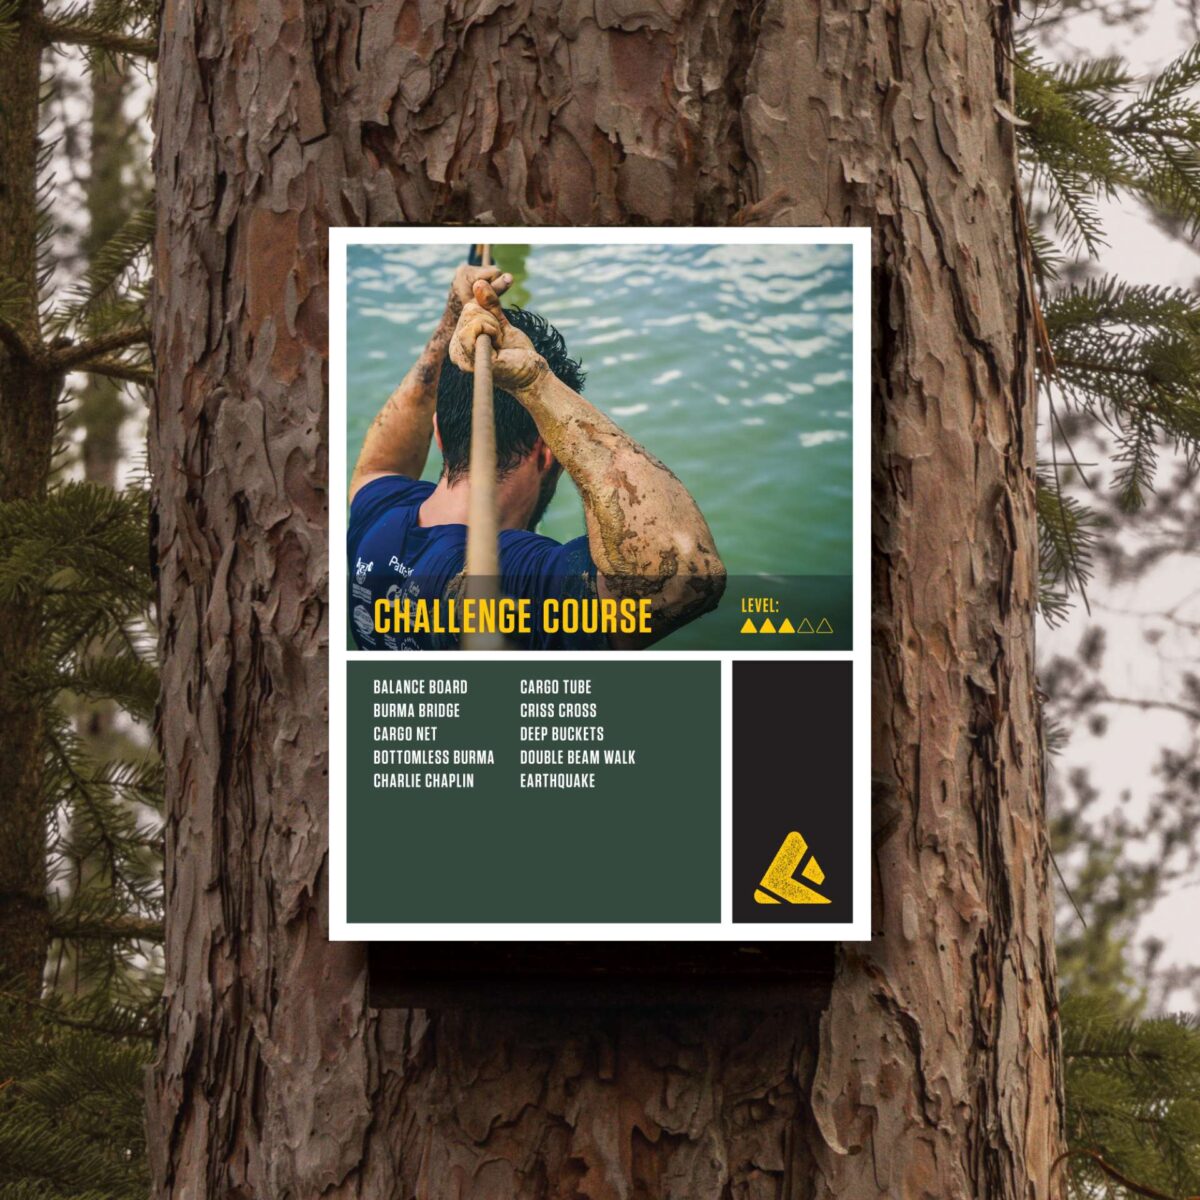 Challenge course signage for The Forge adventure park affixed to a tree